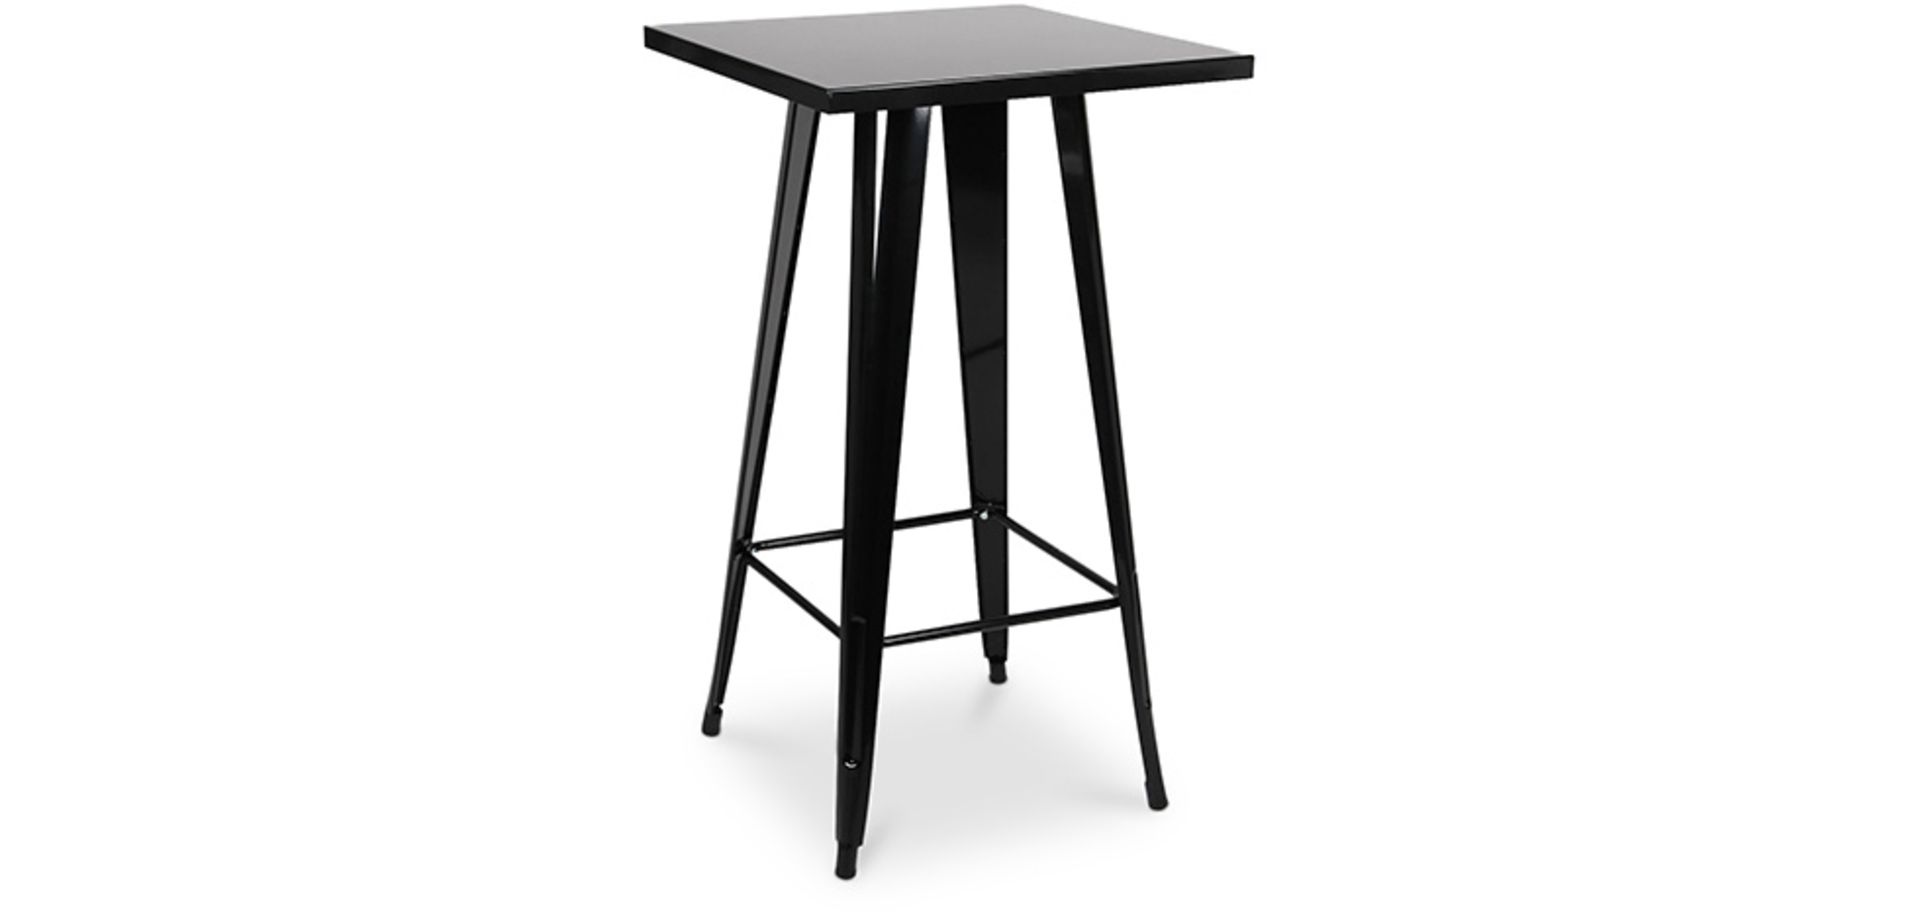 1 x Tolix Industrial Style Outdoor Bar Table and Bar Stool Set in Black - Includes 1 x Bar Table and - Image 2 of 7